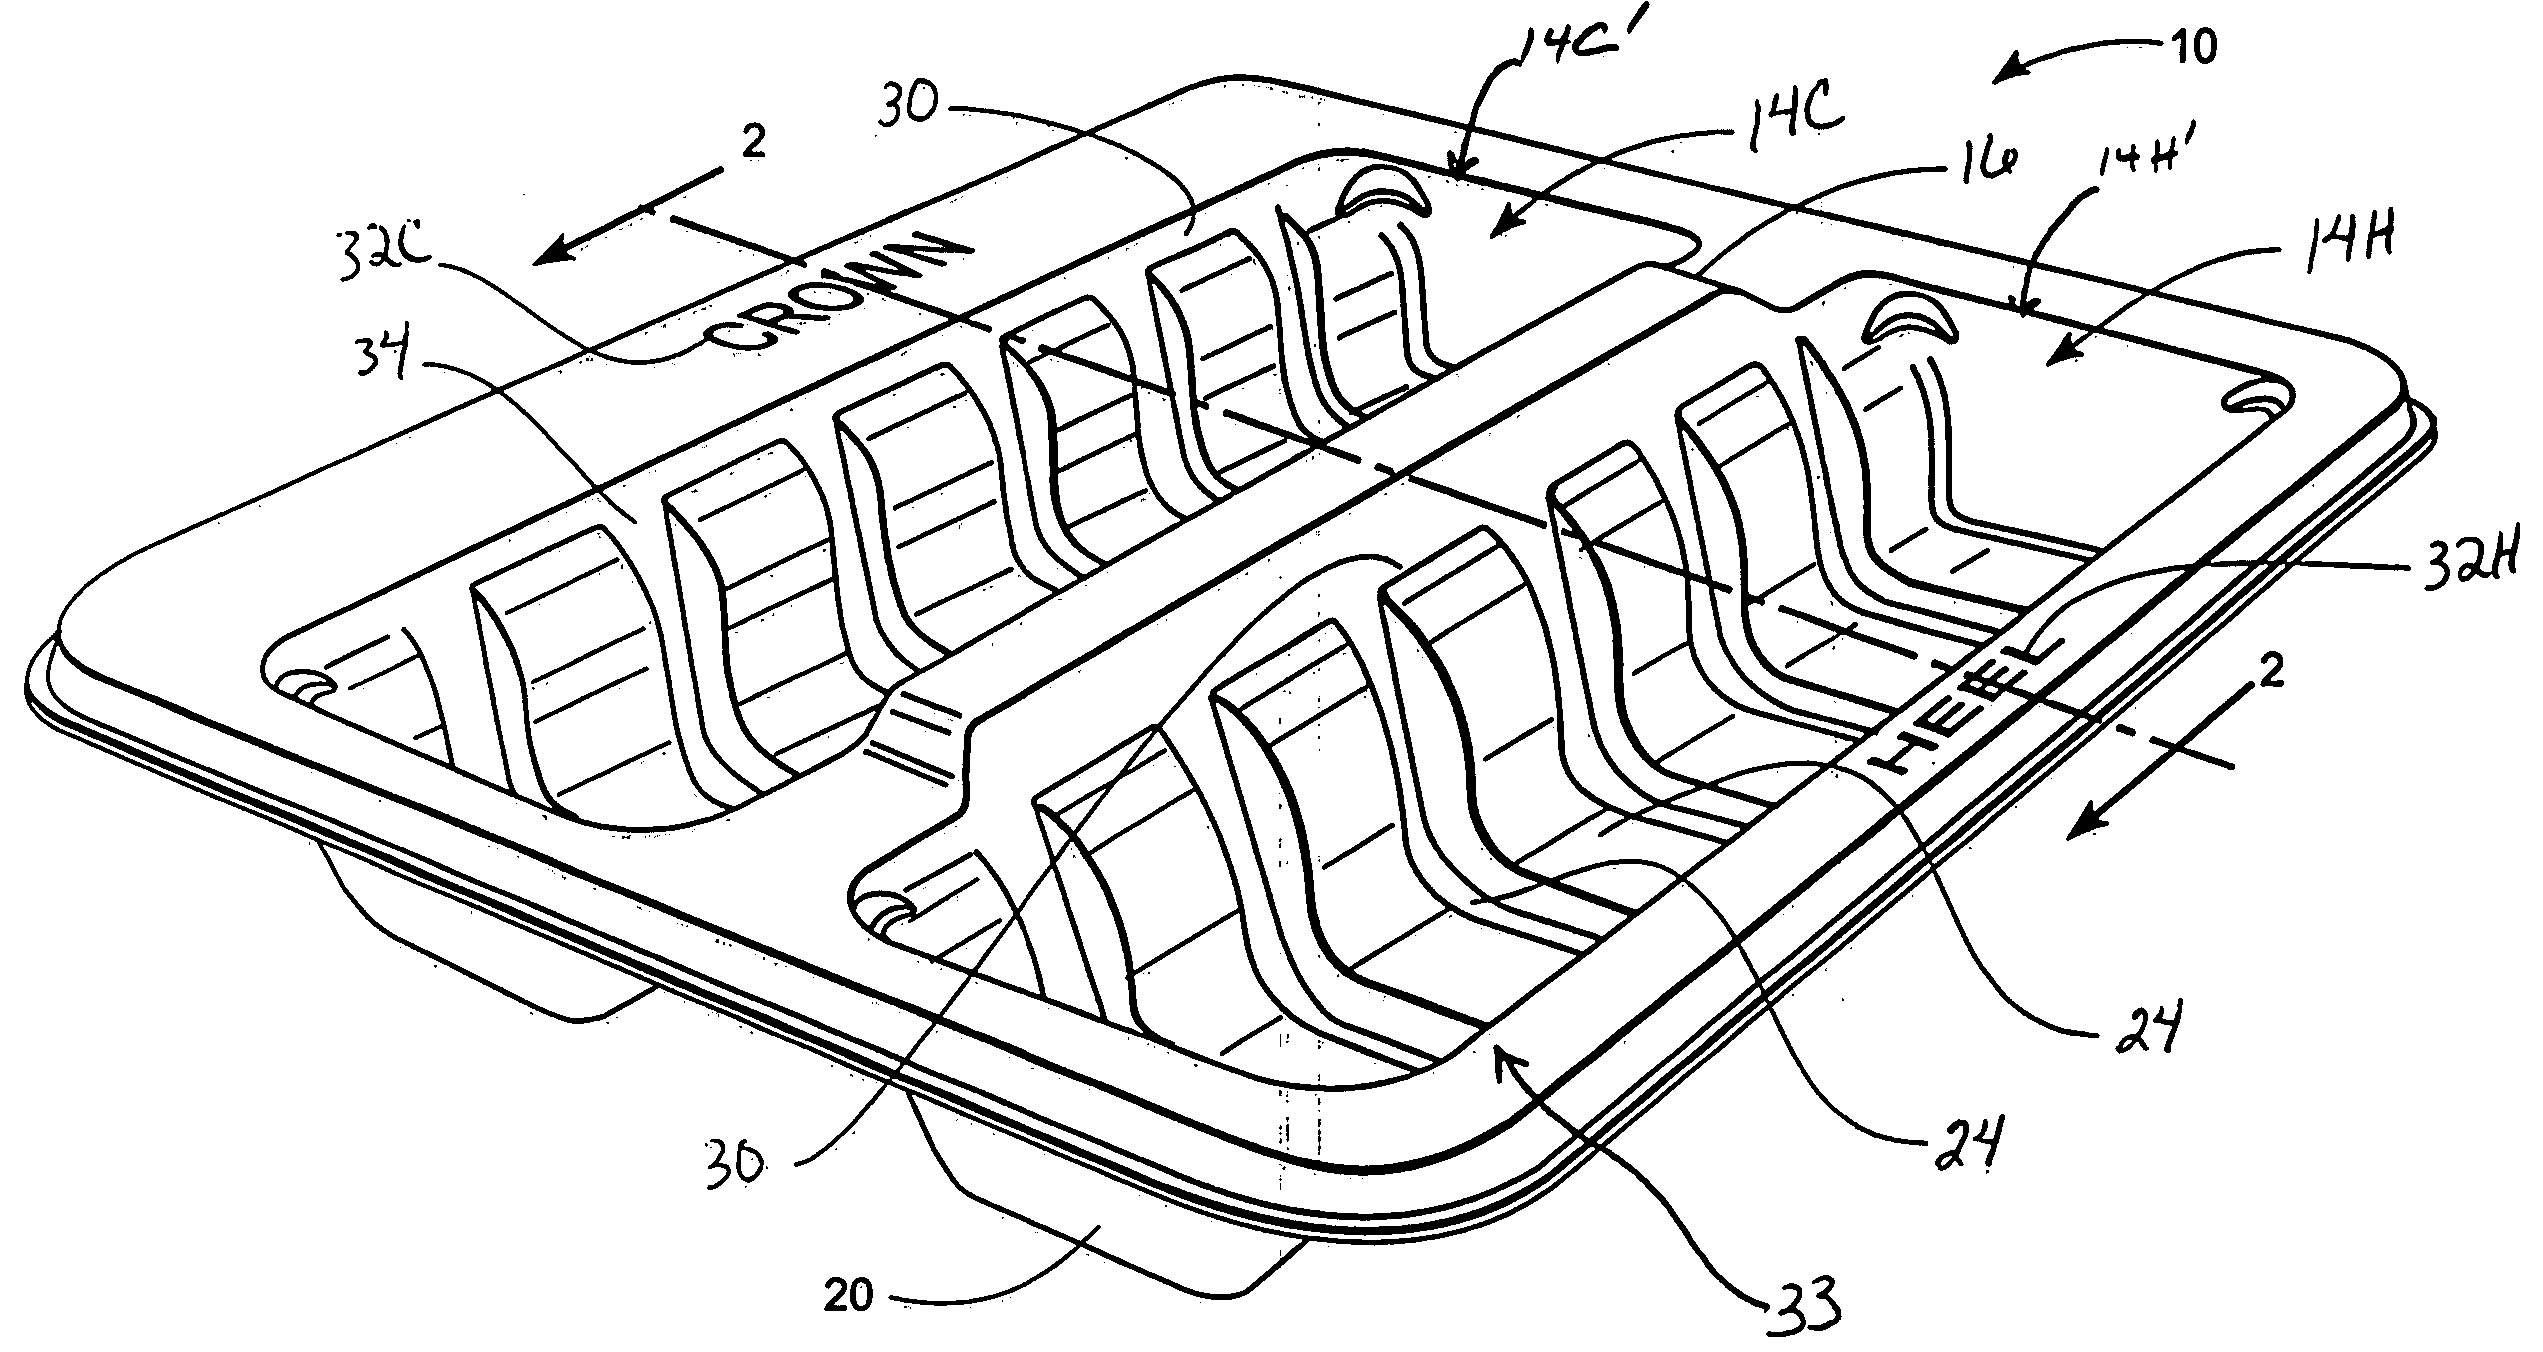 Method and apparatus for making a sandwich